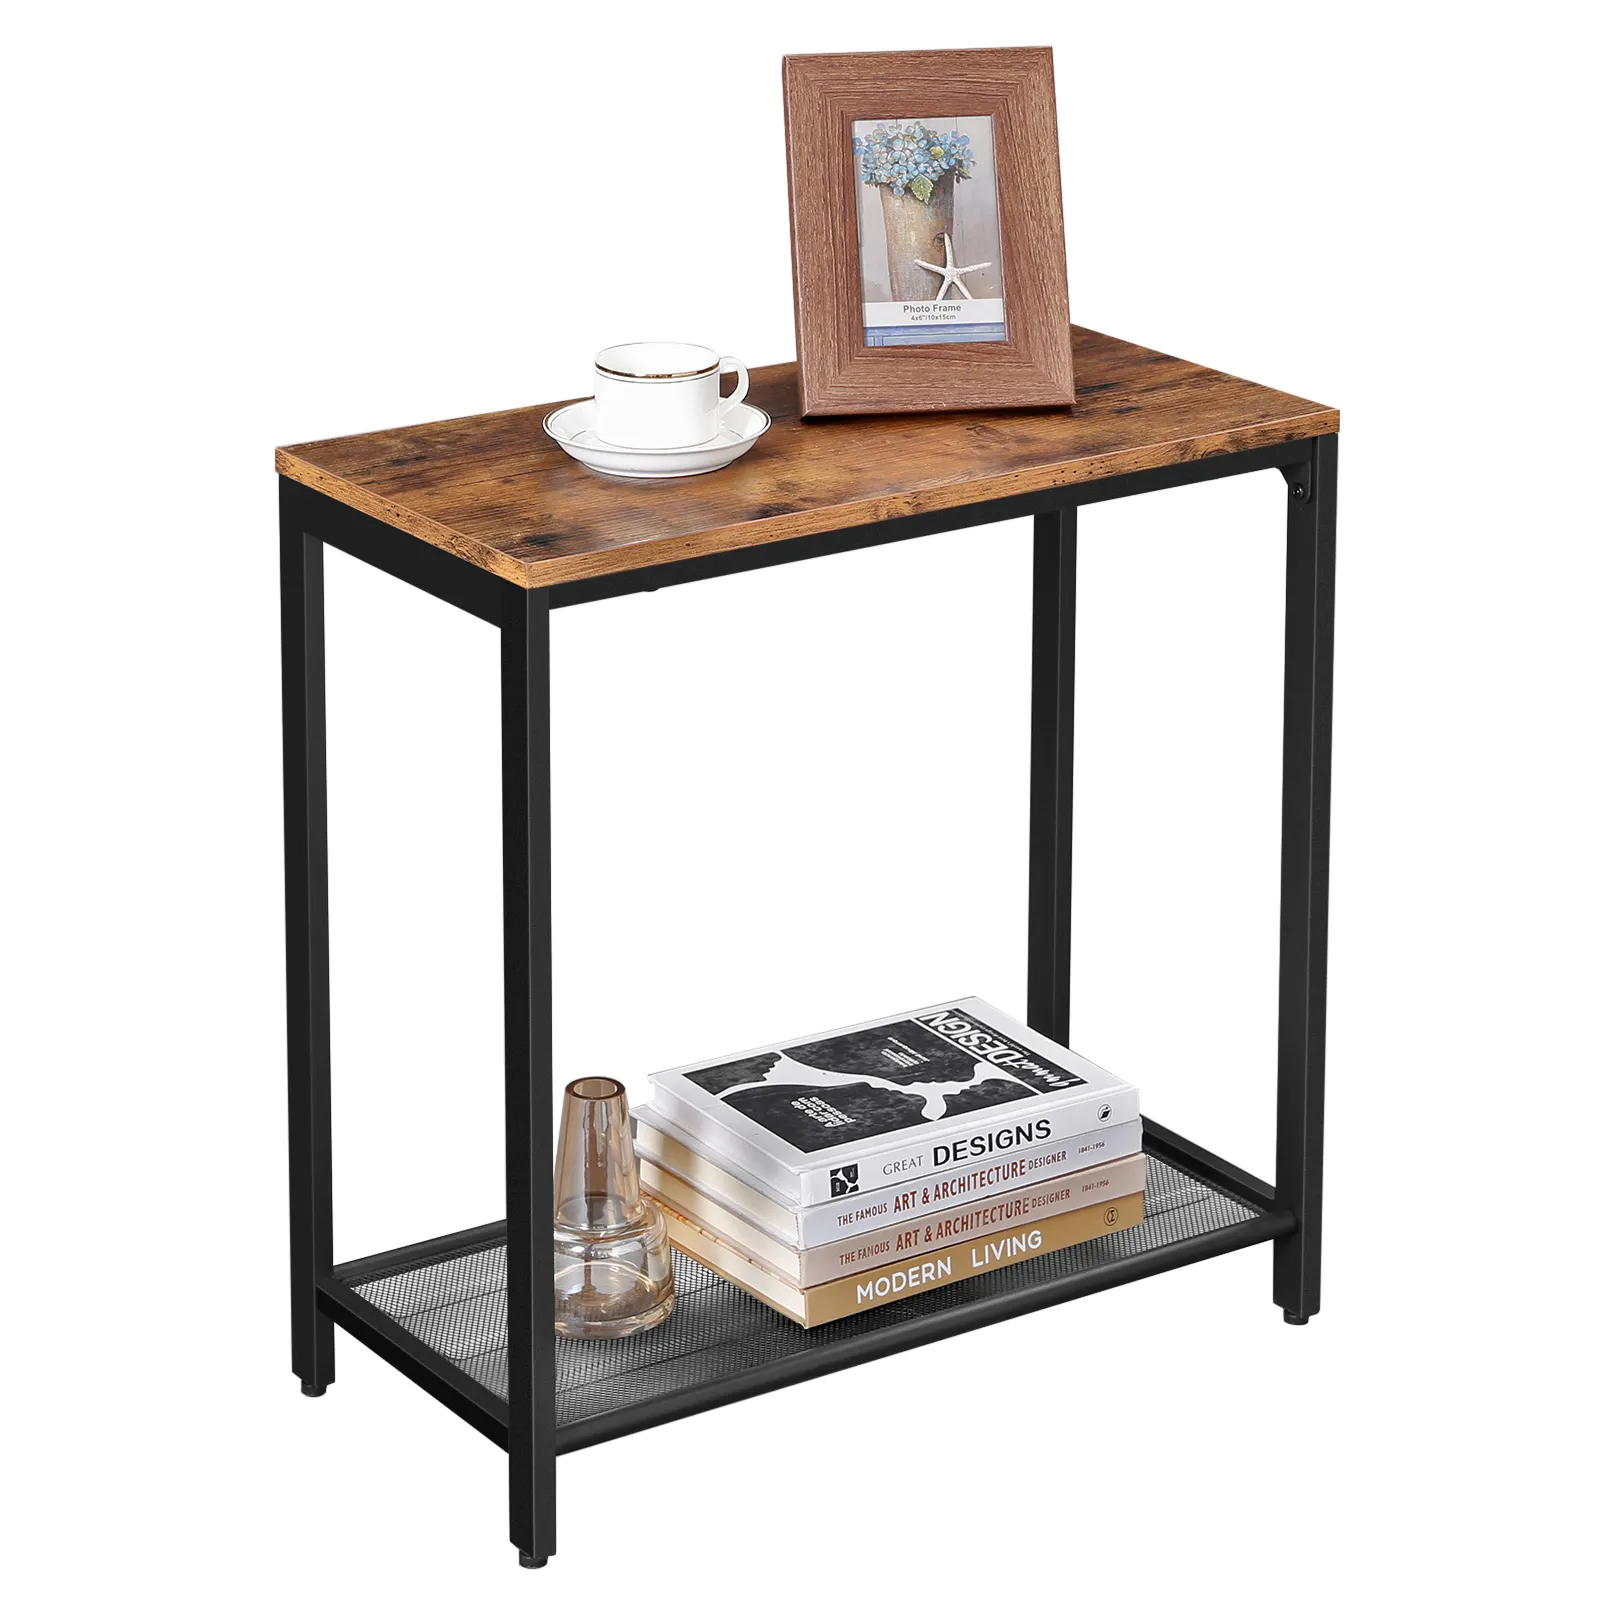 VASAGLE Industrial Sofa Side Table For Bedroom Narrow Small End Table with Mesh Shelf